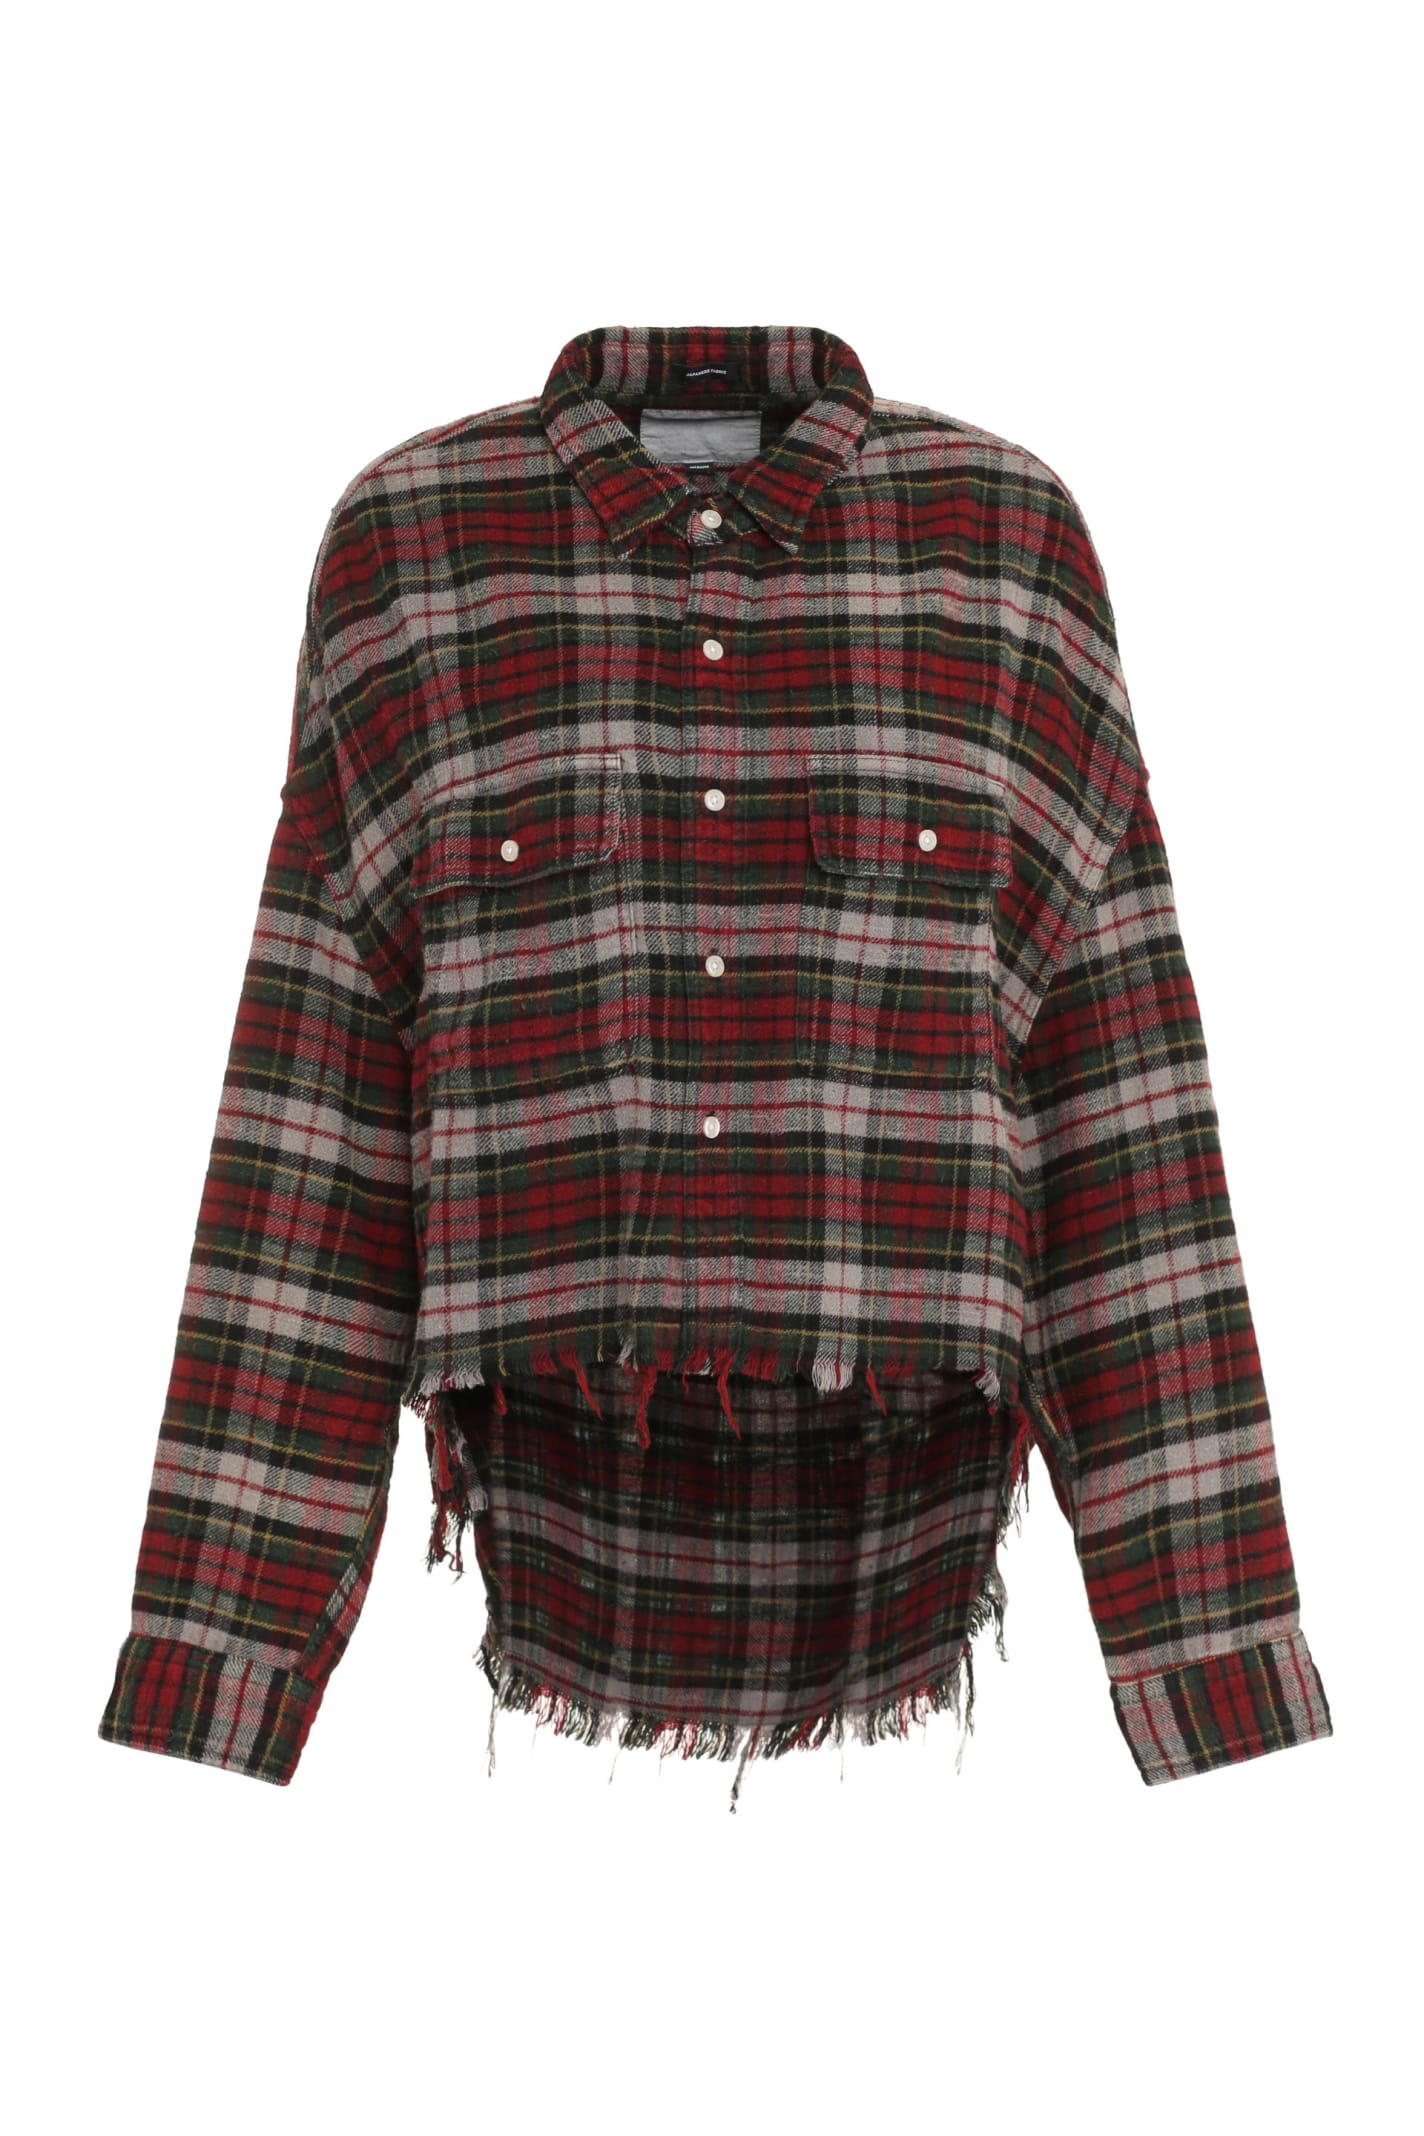 R13 Checked Flannel Shirt